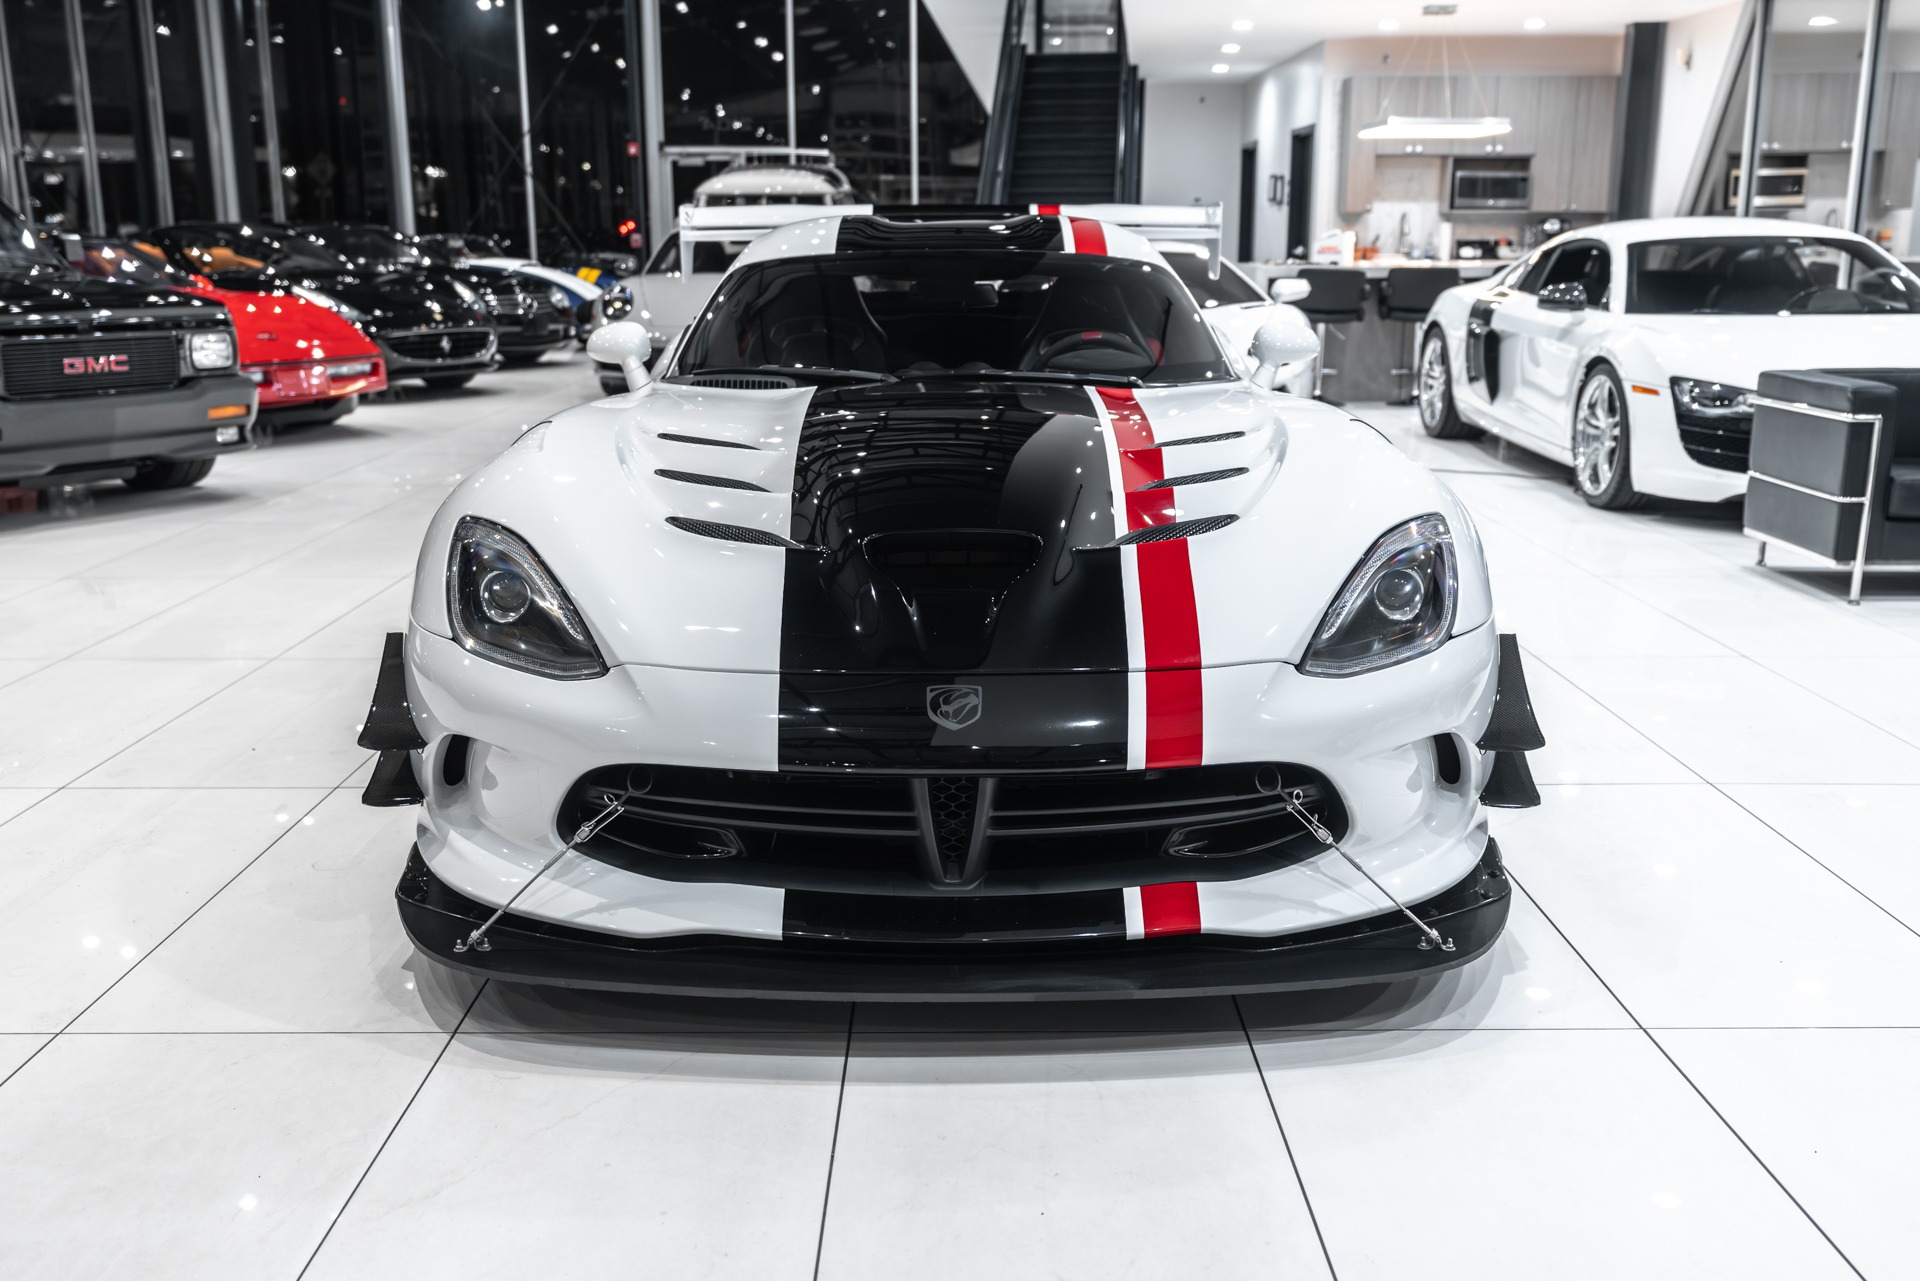 Used-2016-Dodge-Viper-ACR-Extreme-Aero-Pkg-Coupe-Black---Red-Painted-Stripes-ONLY-12k-Miles